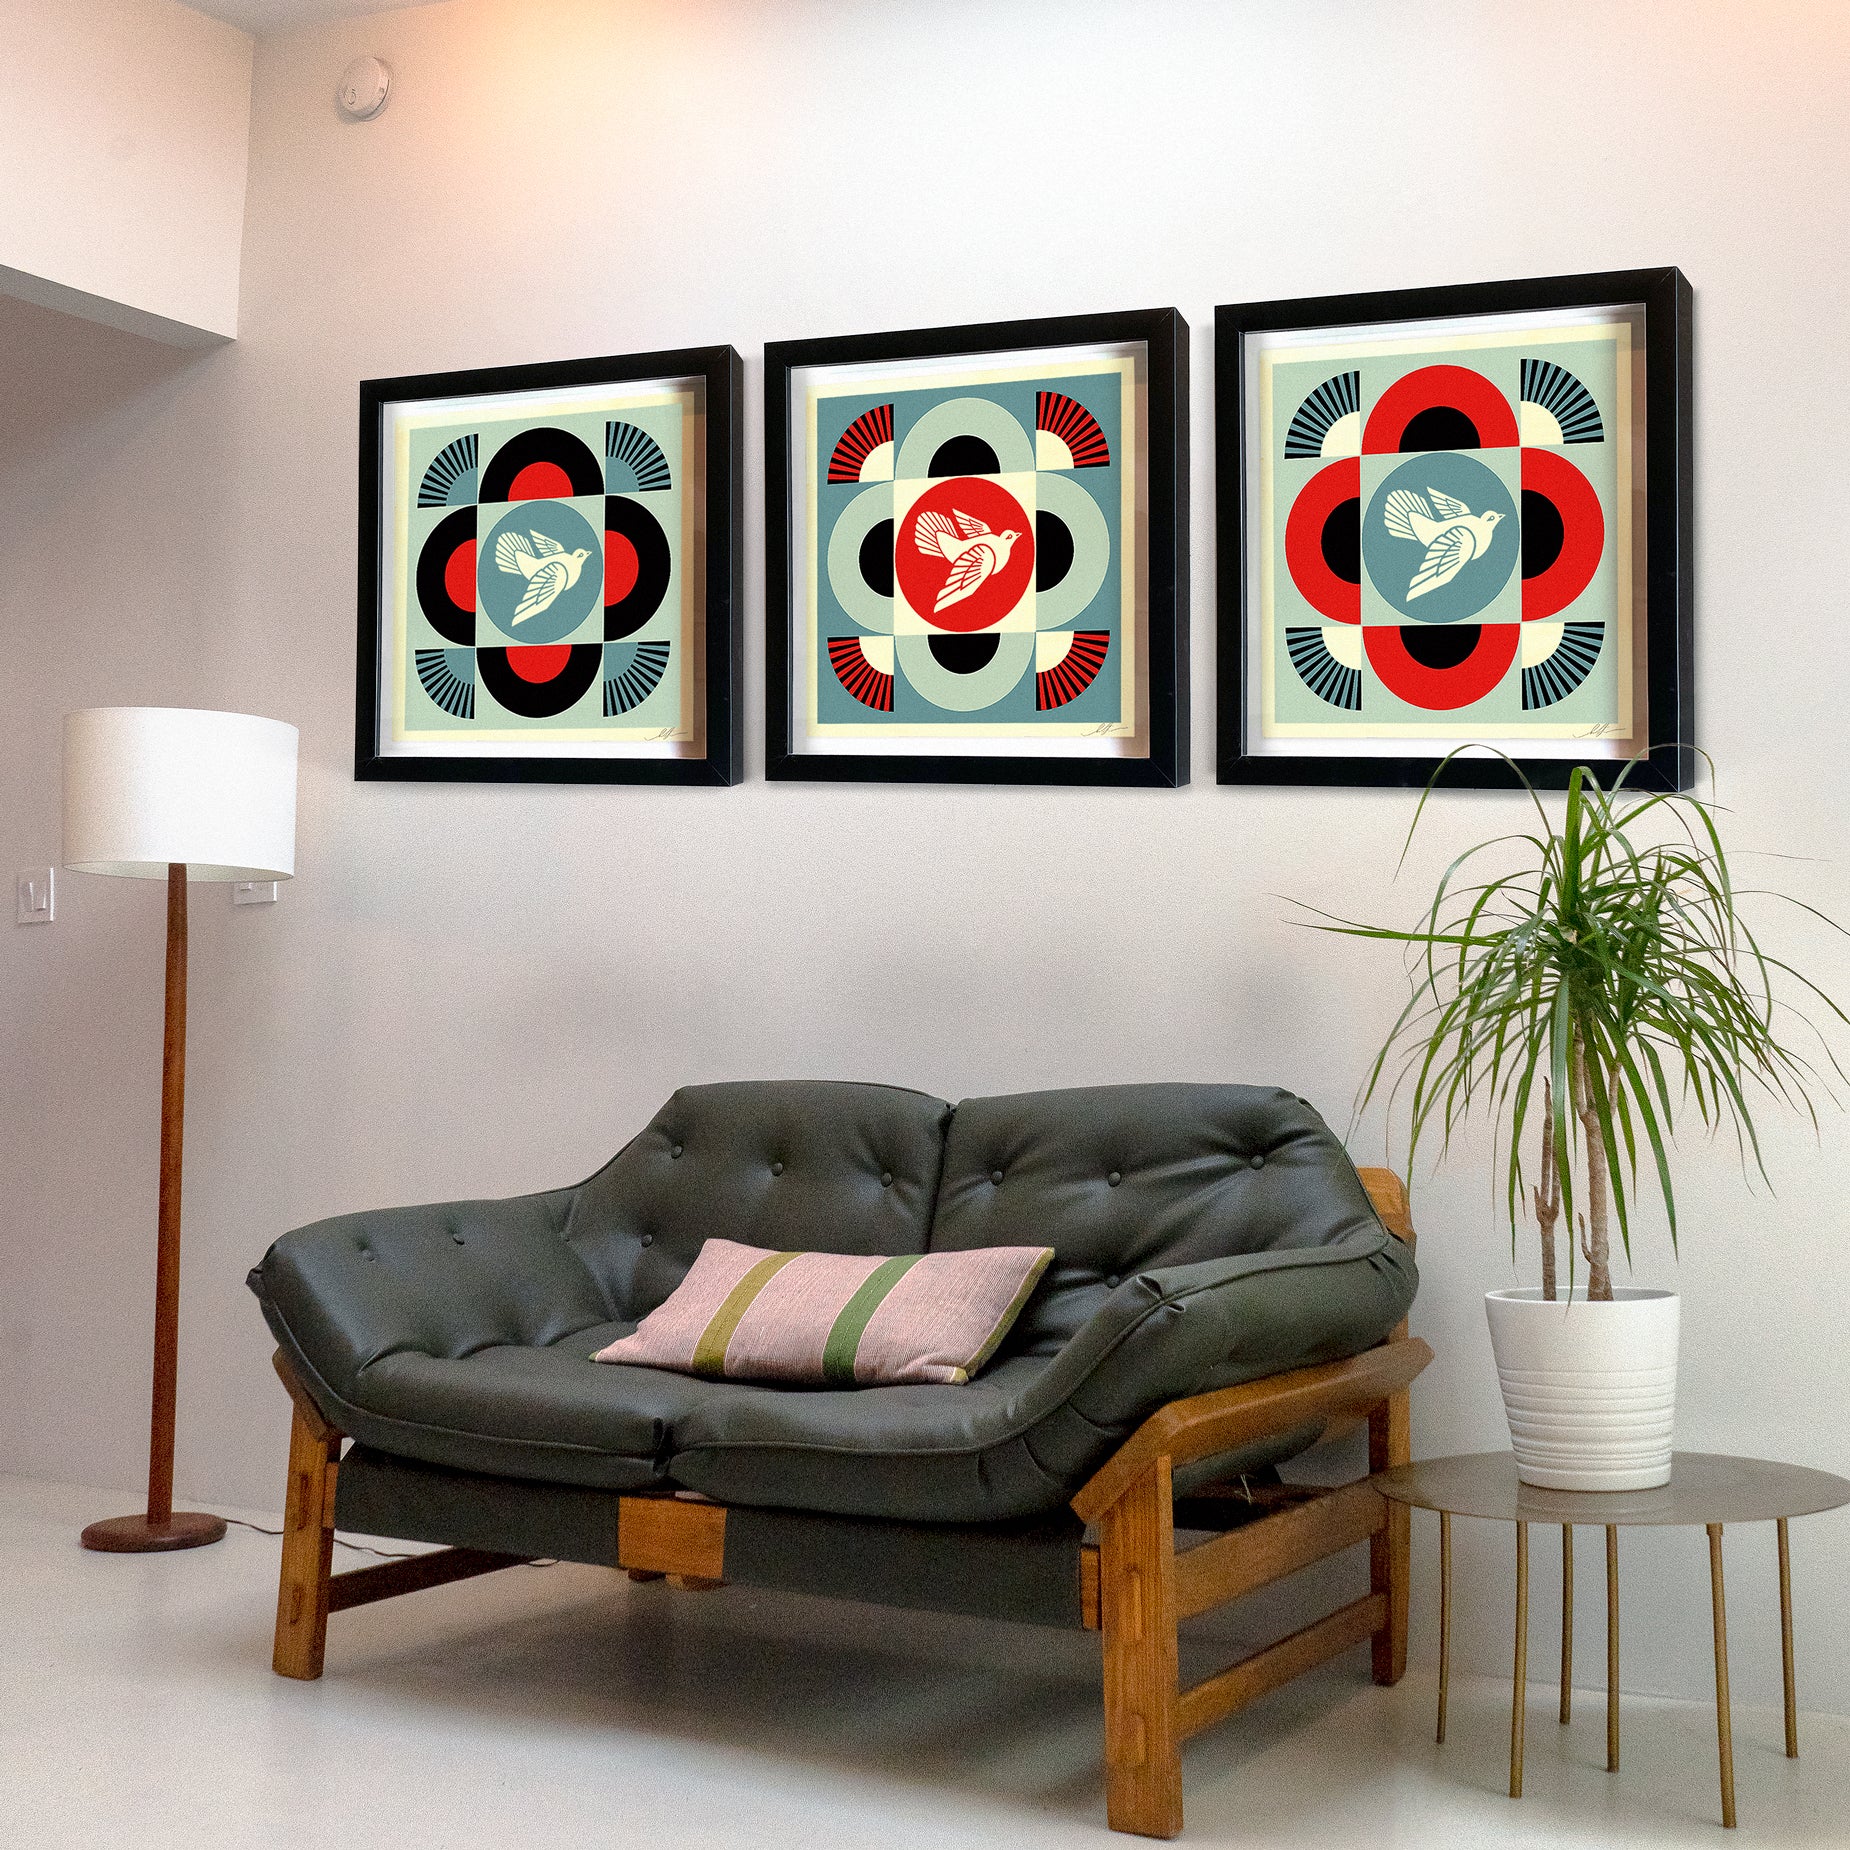 GEOMETRIC DOVE Signed Offset Lithograph Set hung on wall